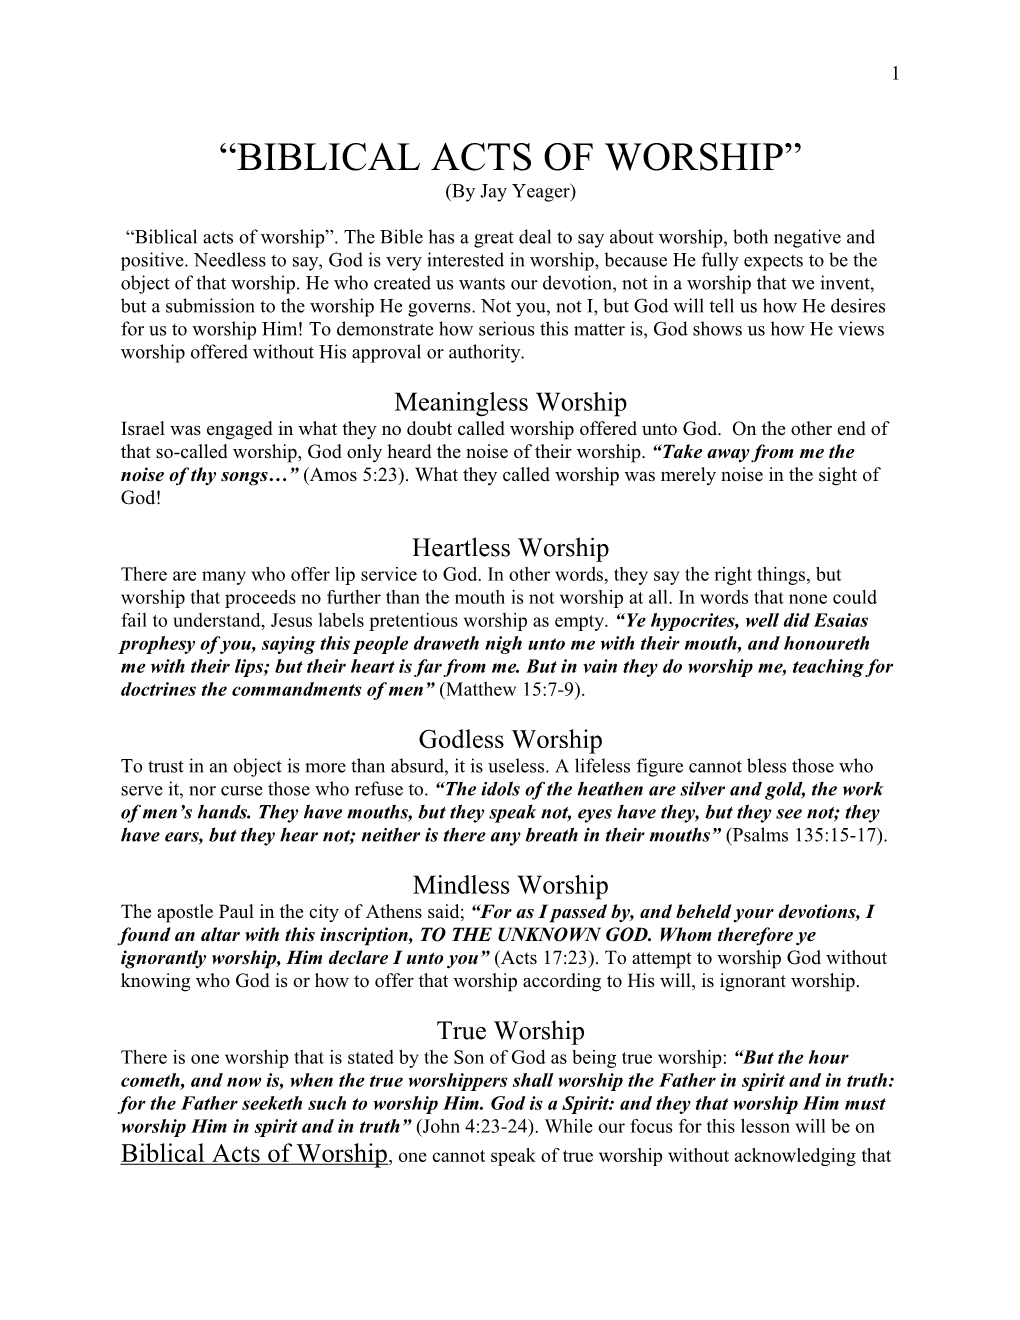 Biblical Acts of Worship